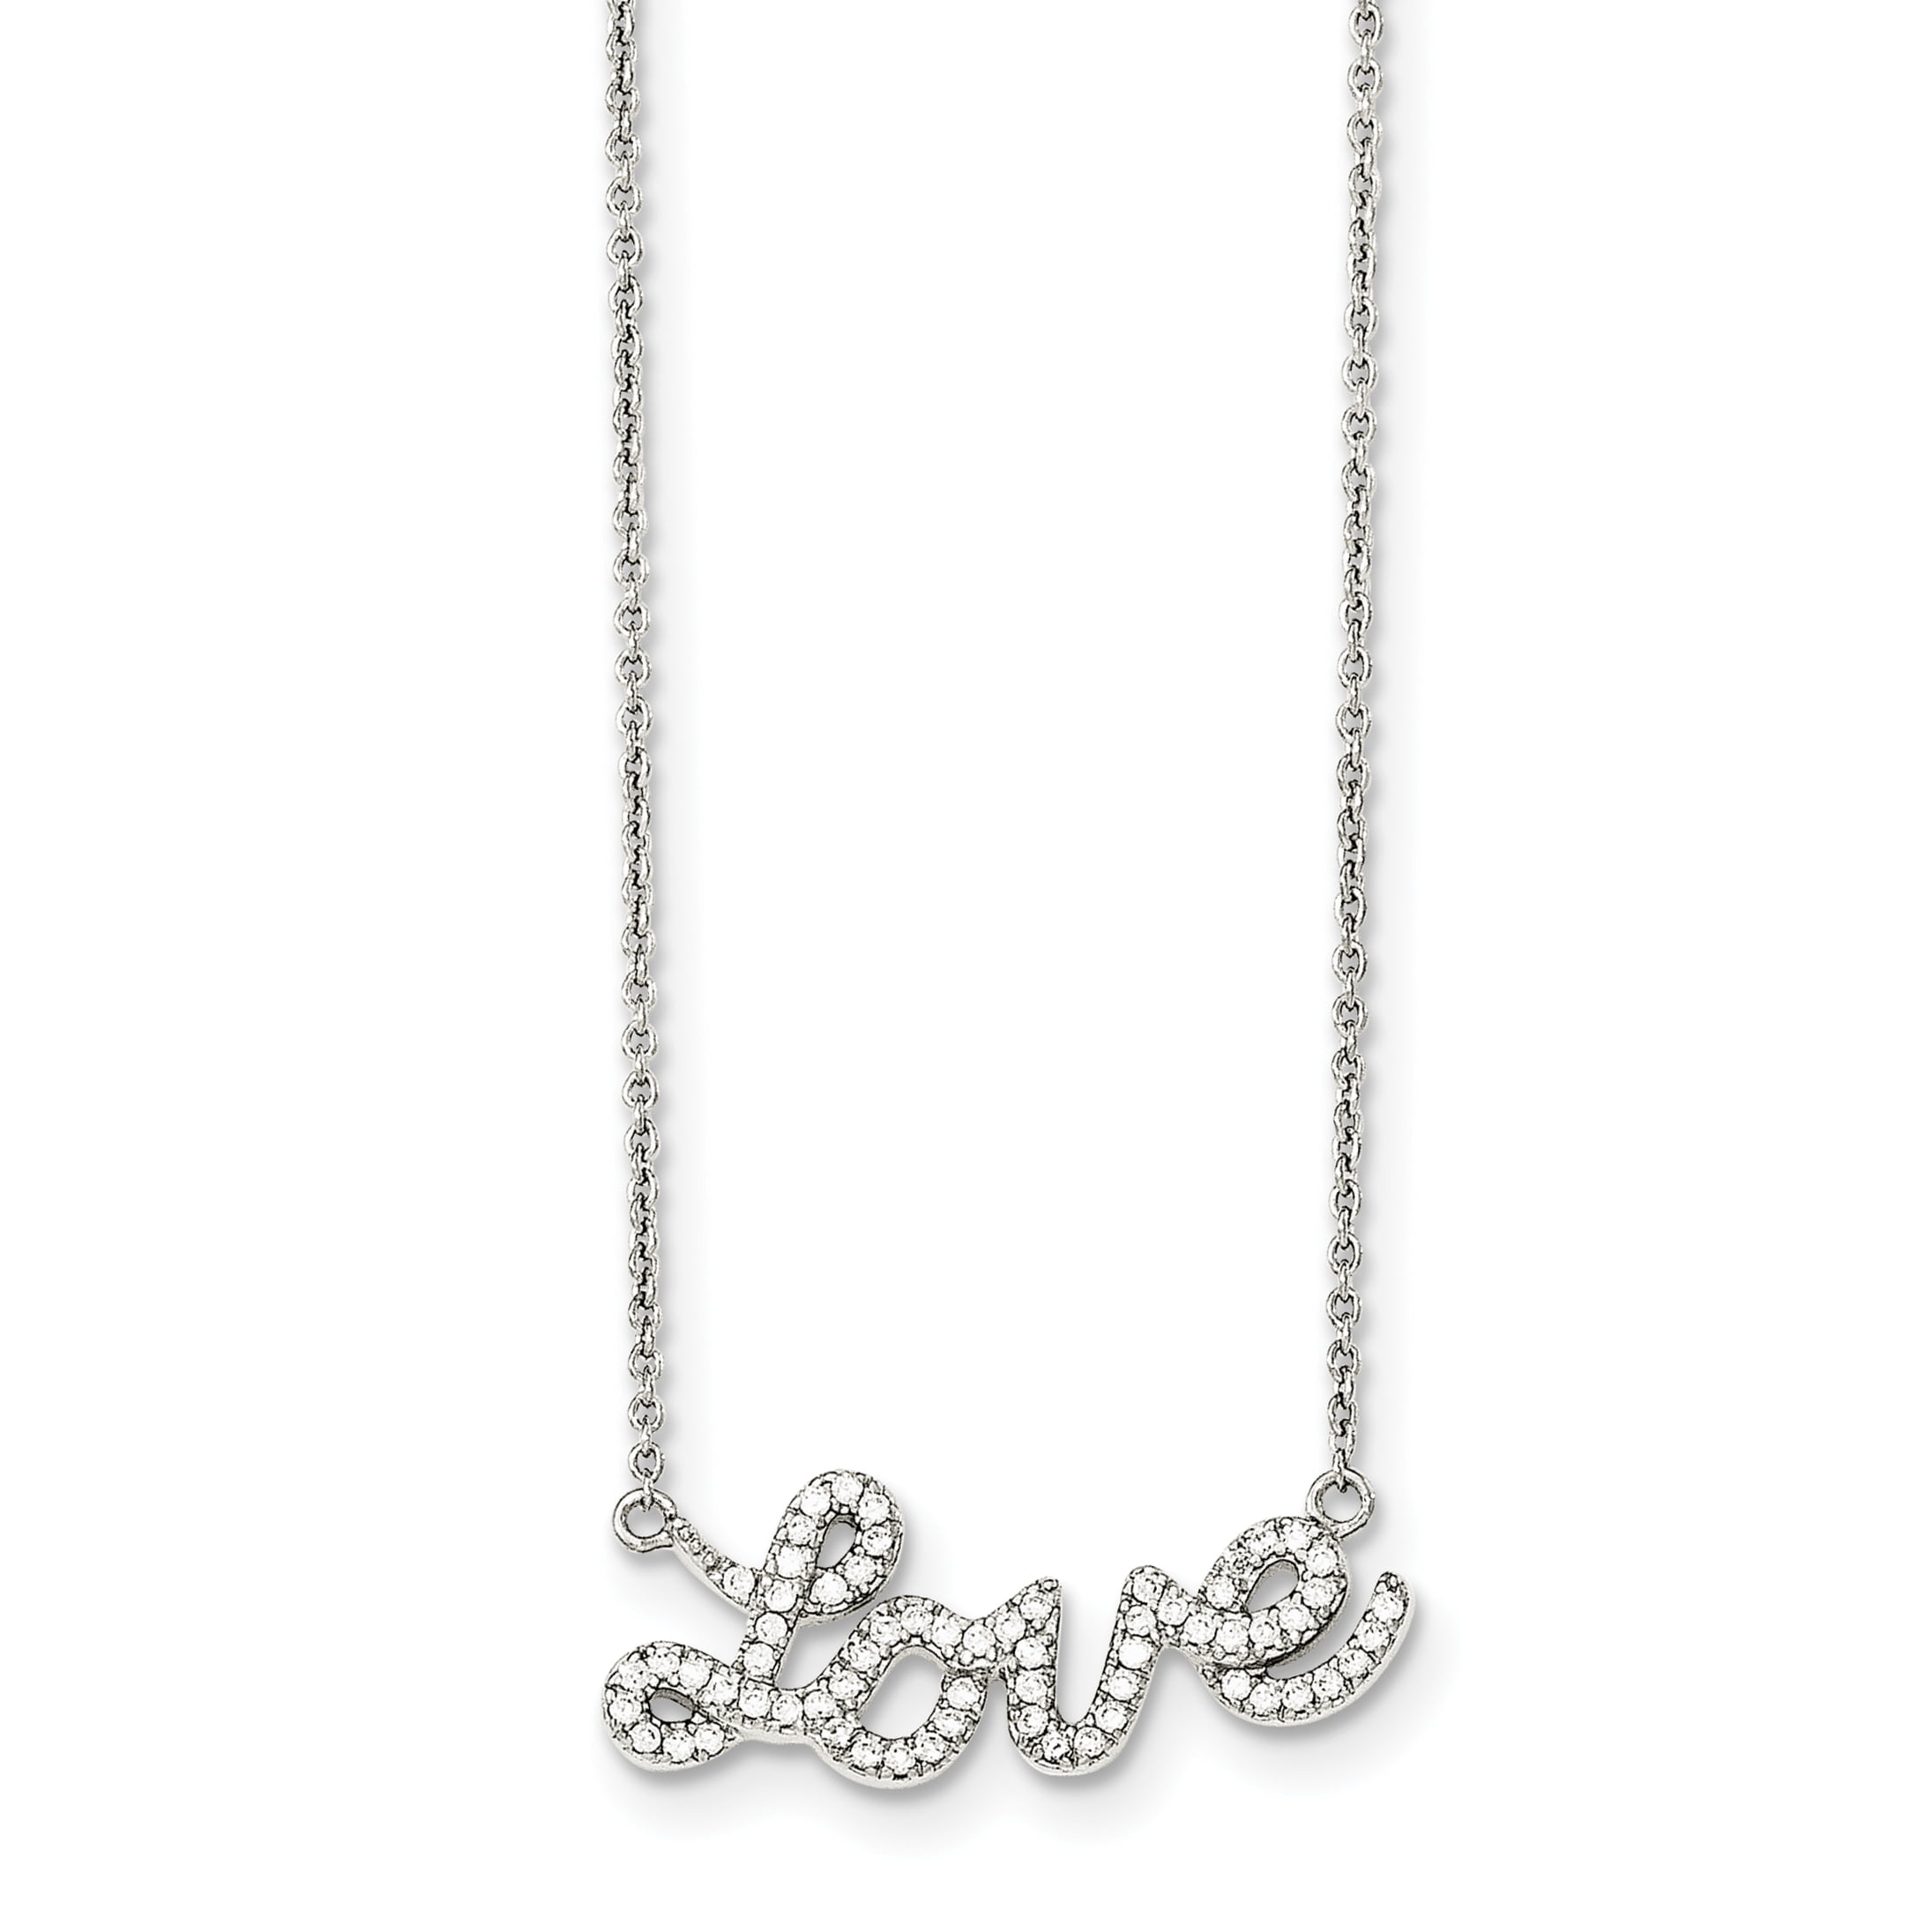 Details about   Sterling Silver Triangle of Love Necklace with Cubic Zirconia Stones 18" Chain 